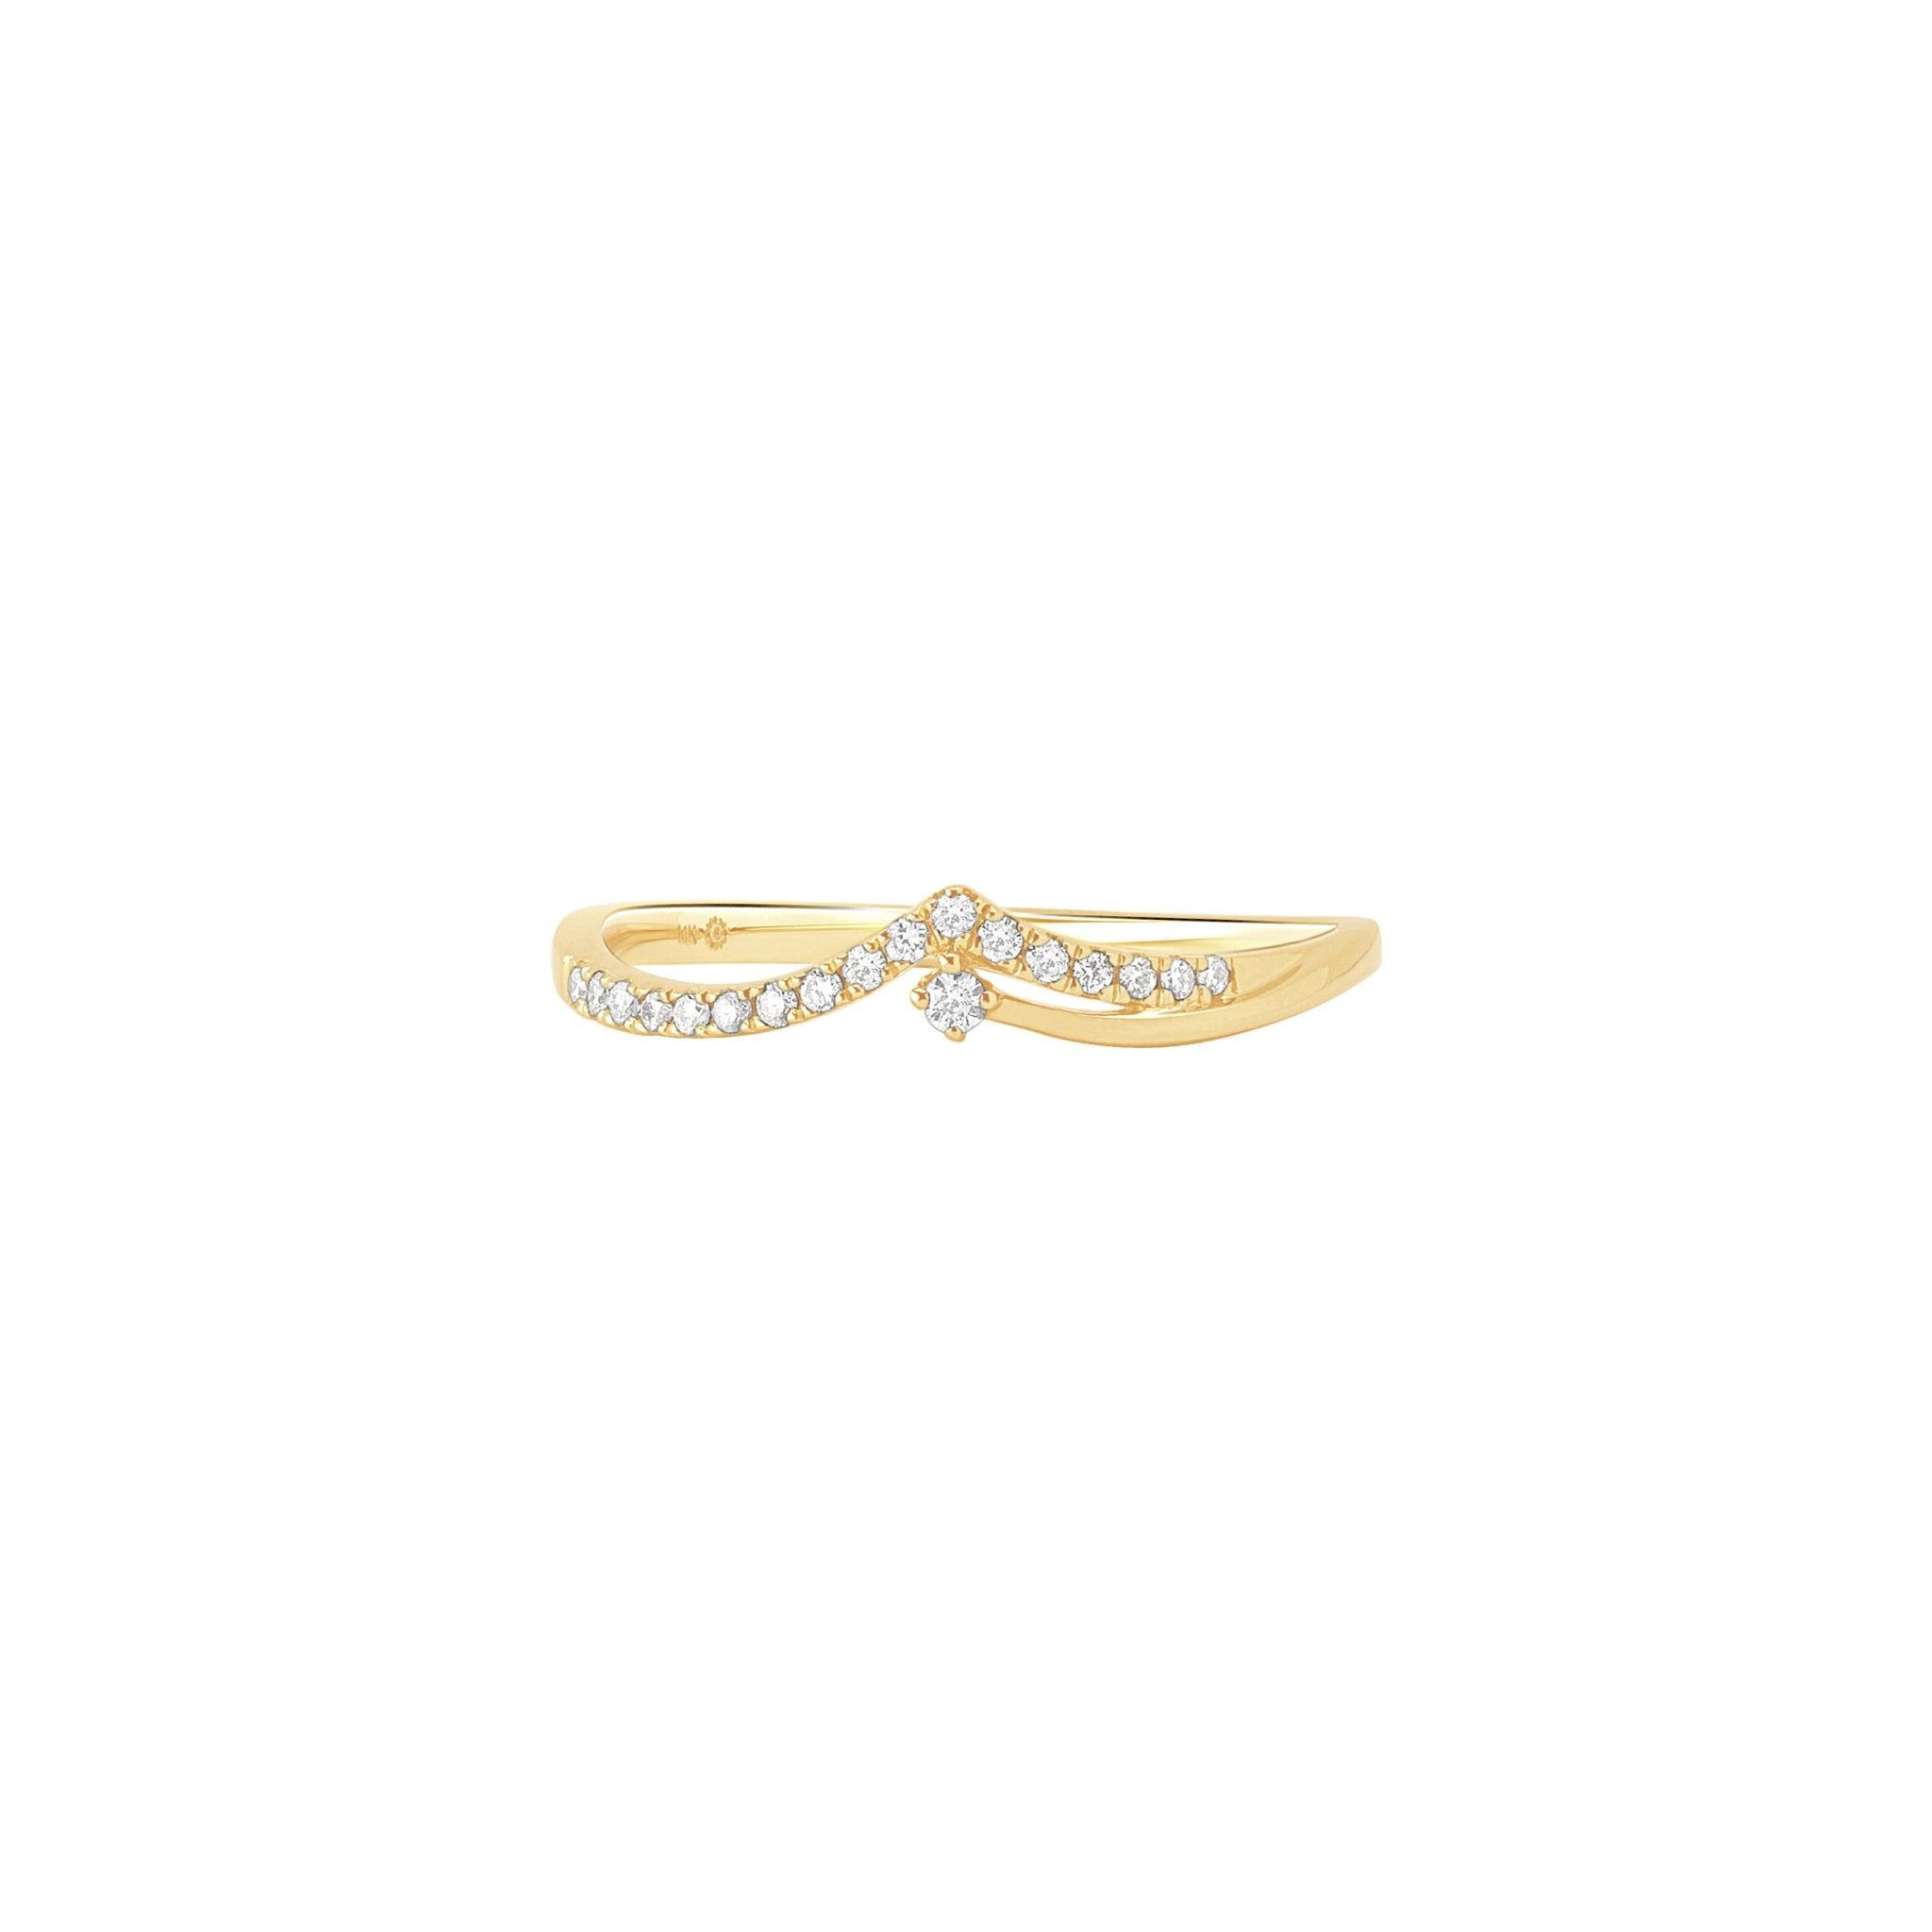 Diamond Shooting Star Ring Rings Estella Collection #product_description# 17411 14k Colorless Gemstone Diamond #tag4# #tag5# #tag6# #tag7# #tag8# #tag9# #tag10# 6